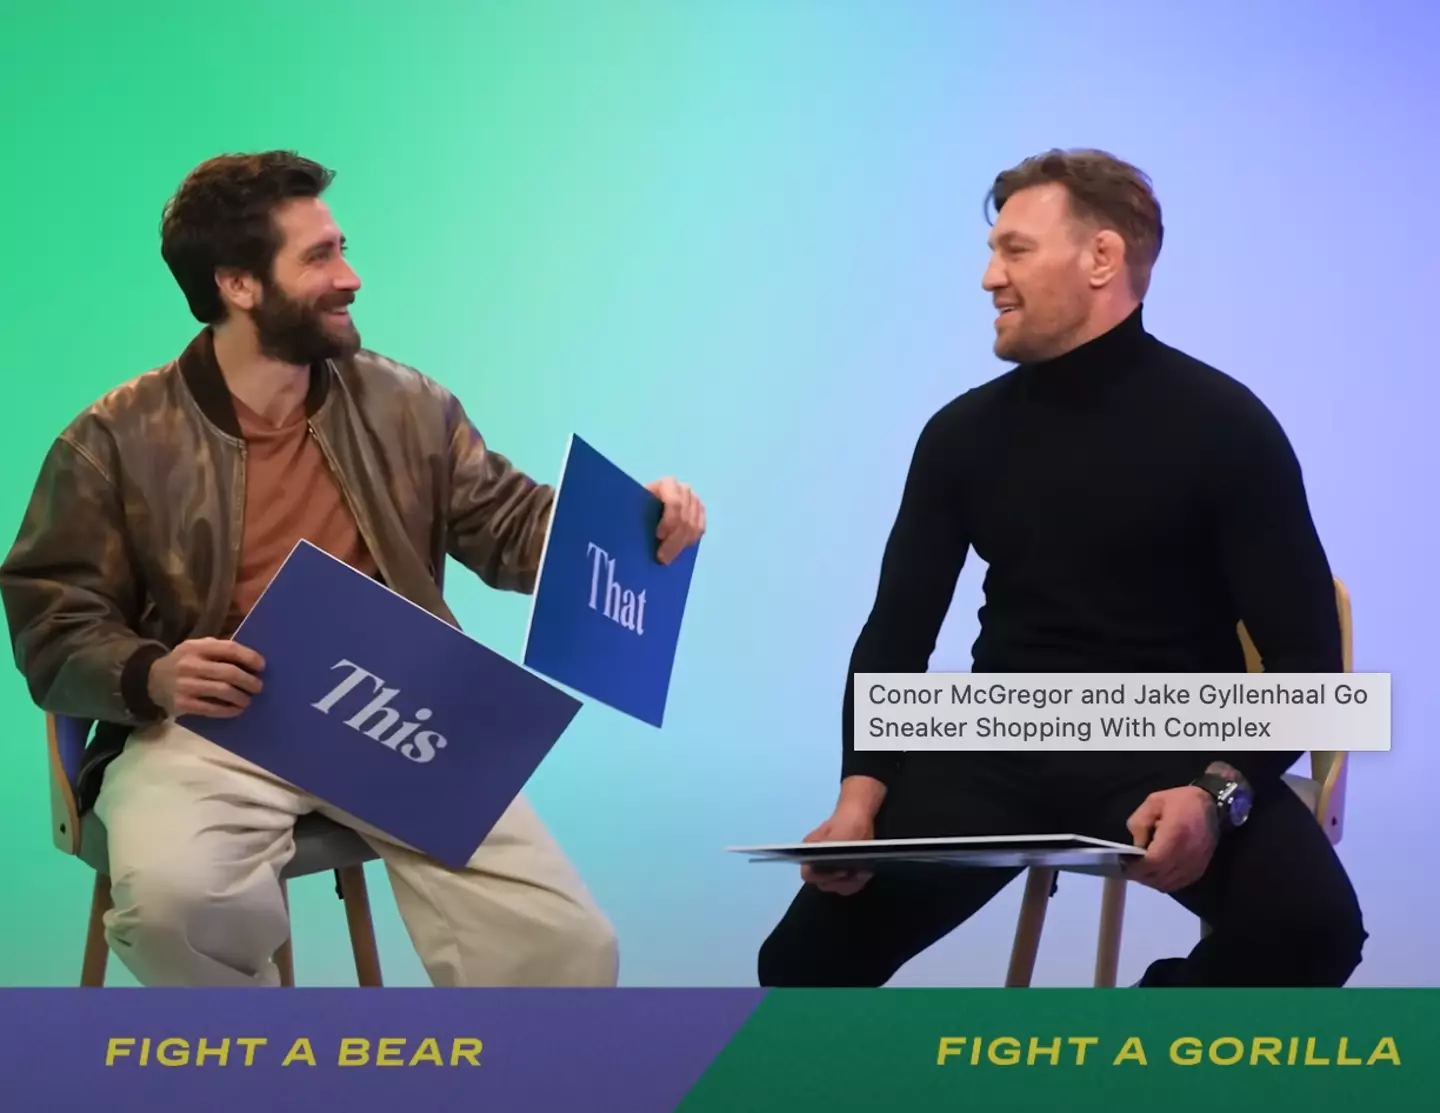 Jake Gyllenhaal and Conor McGregor discussed whether they’d prefer to fight a gorilla or bear.